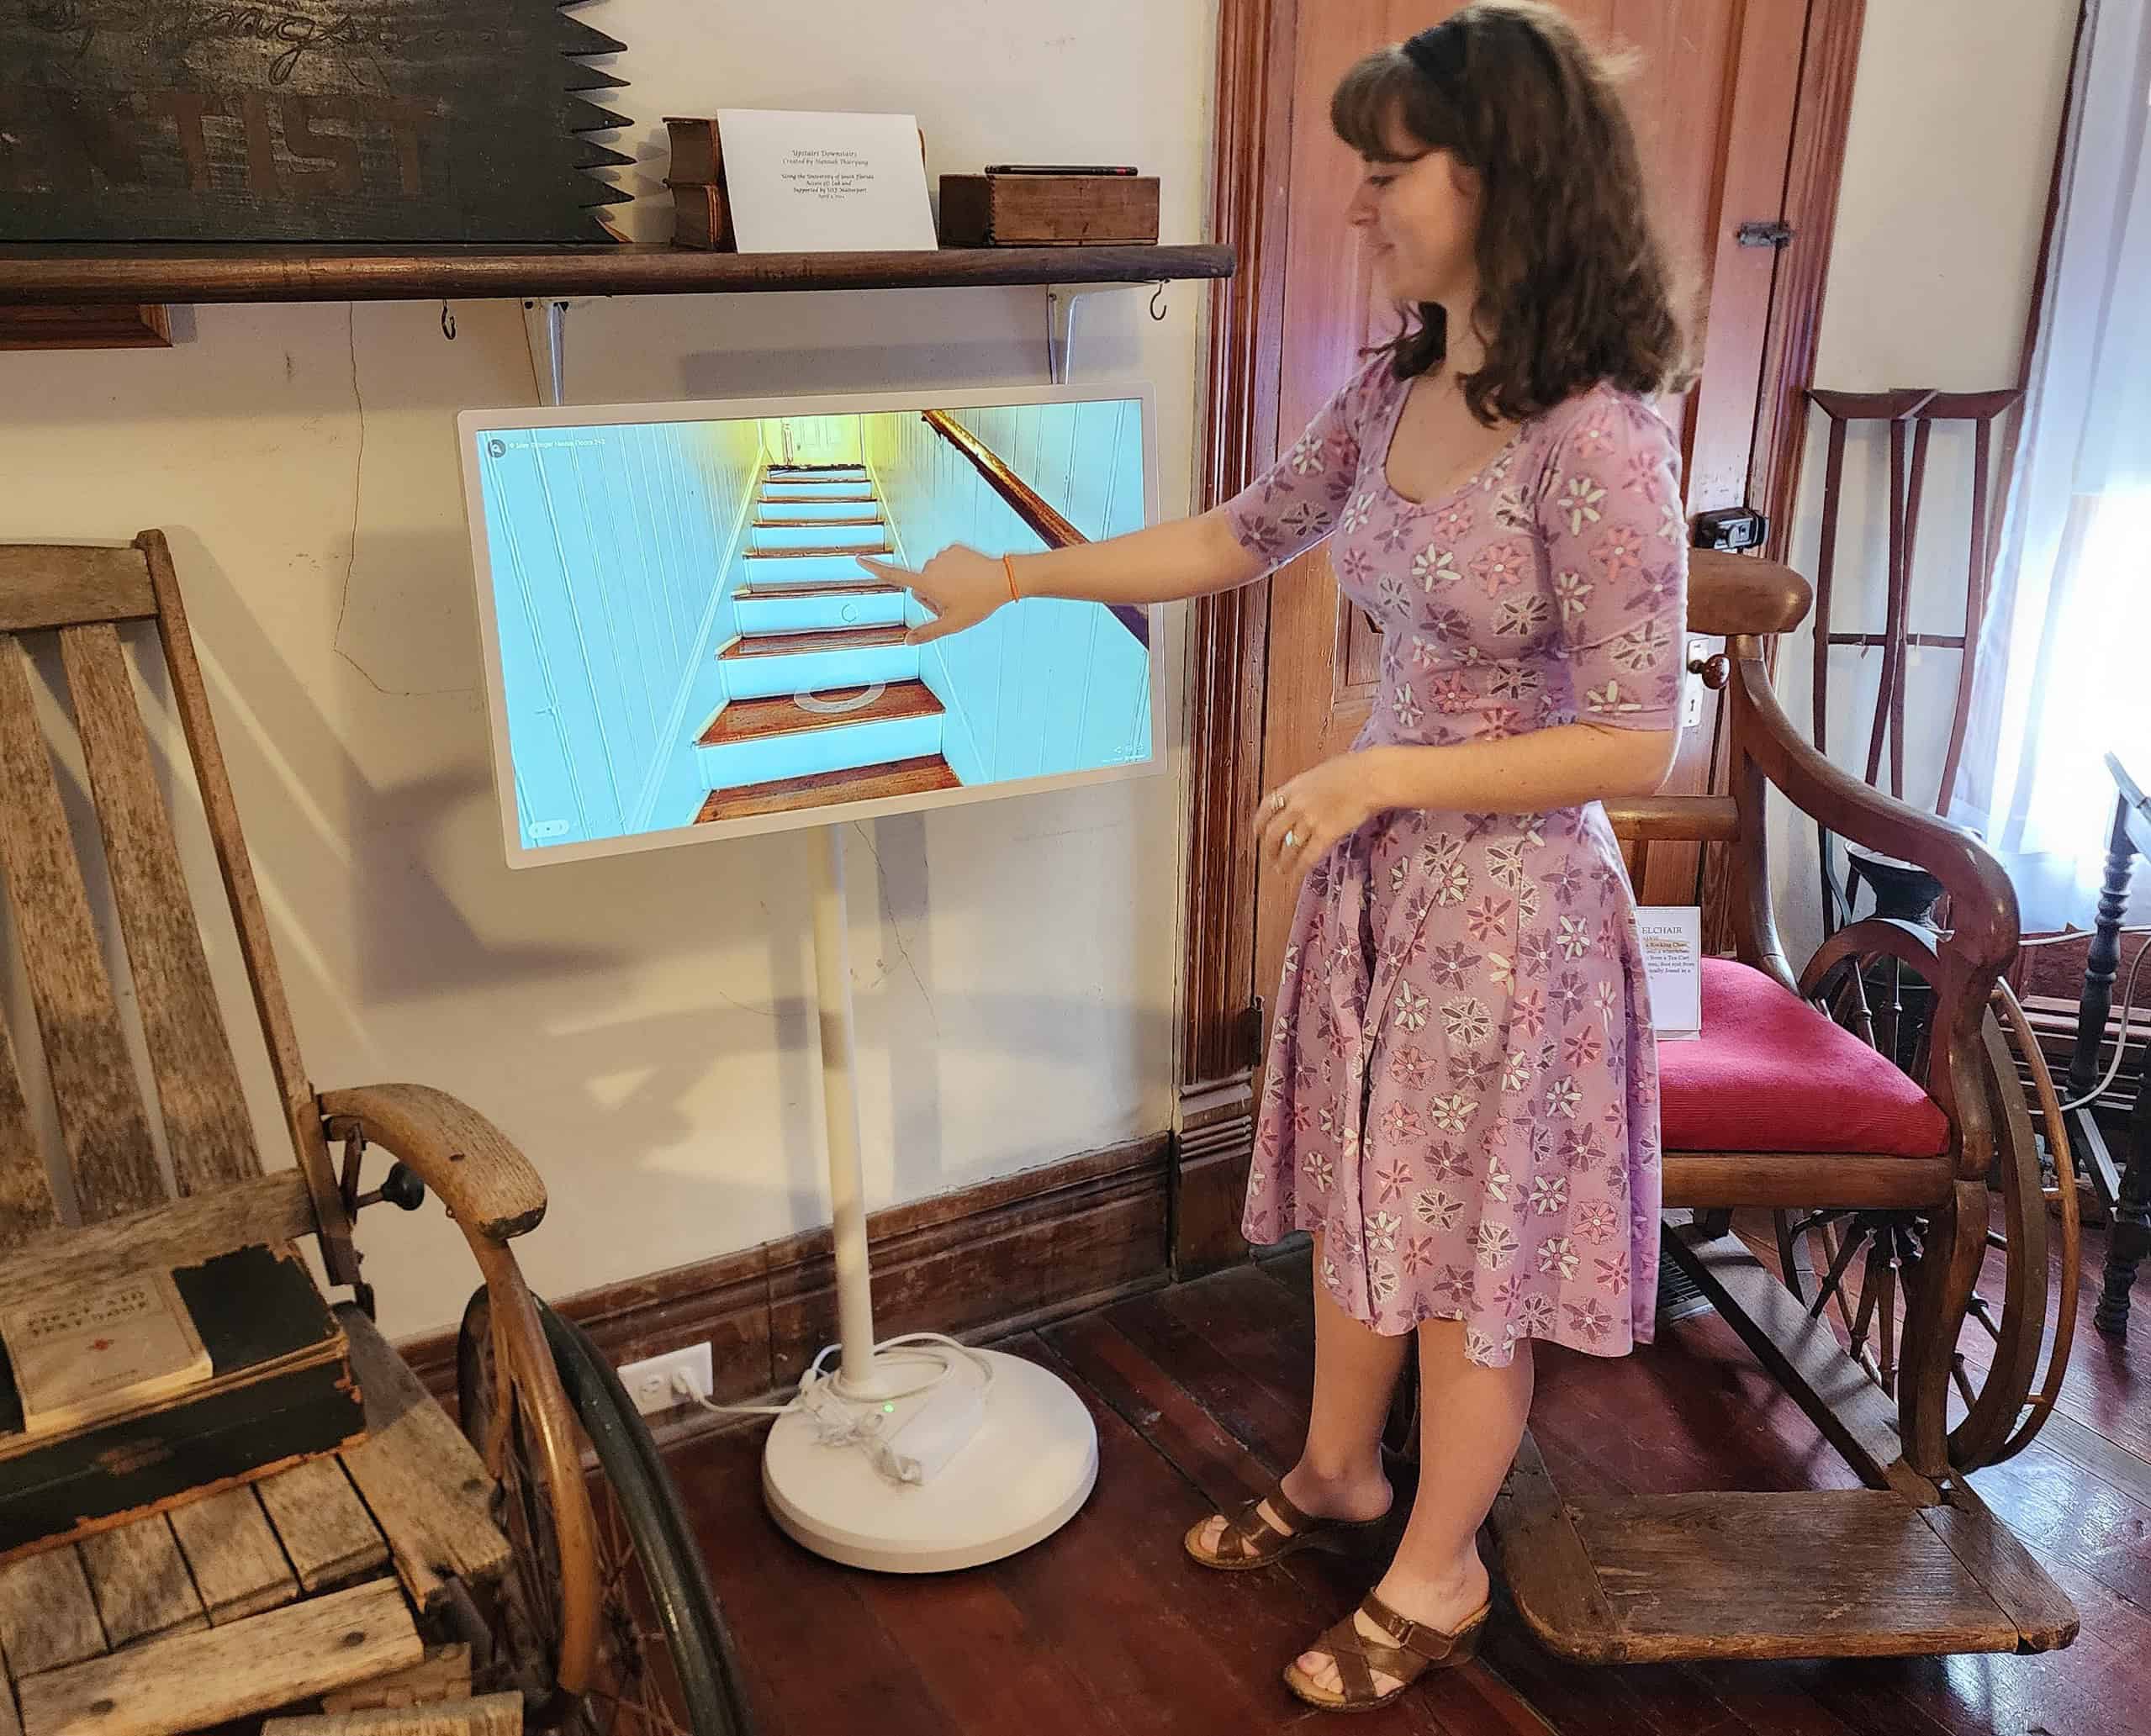 ABOVE: Docent Hannah Thieryung demonstrates how to use the touchscreen kiosk. [Photo by Austyn Szempruch]